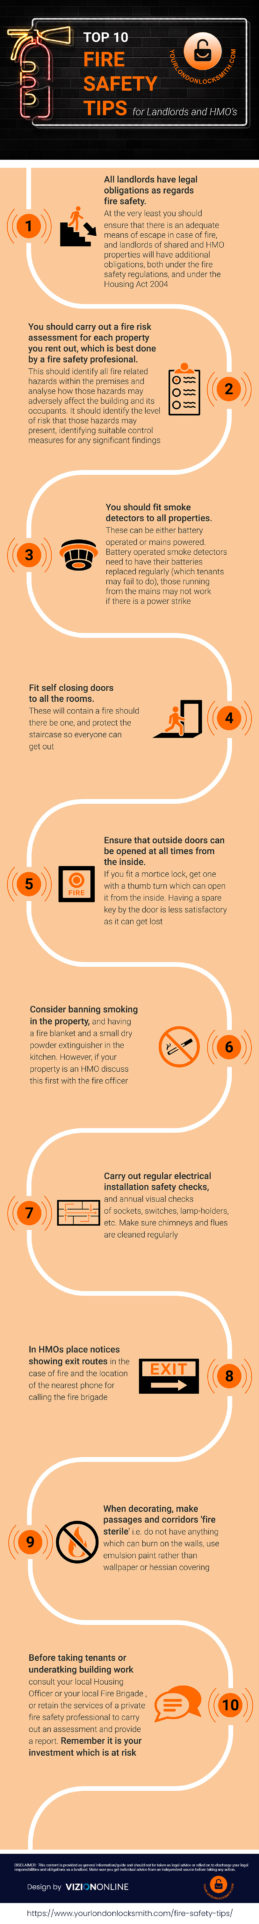 Top 10 Fire Safety Tips For Landlords And HMO’s